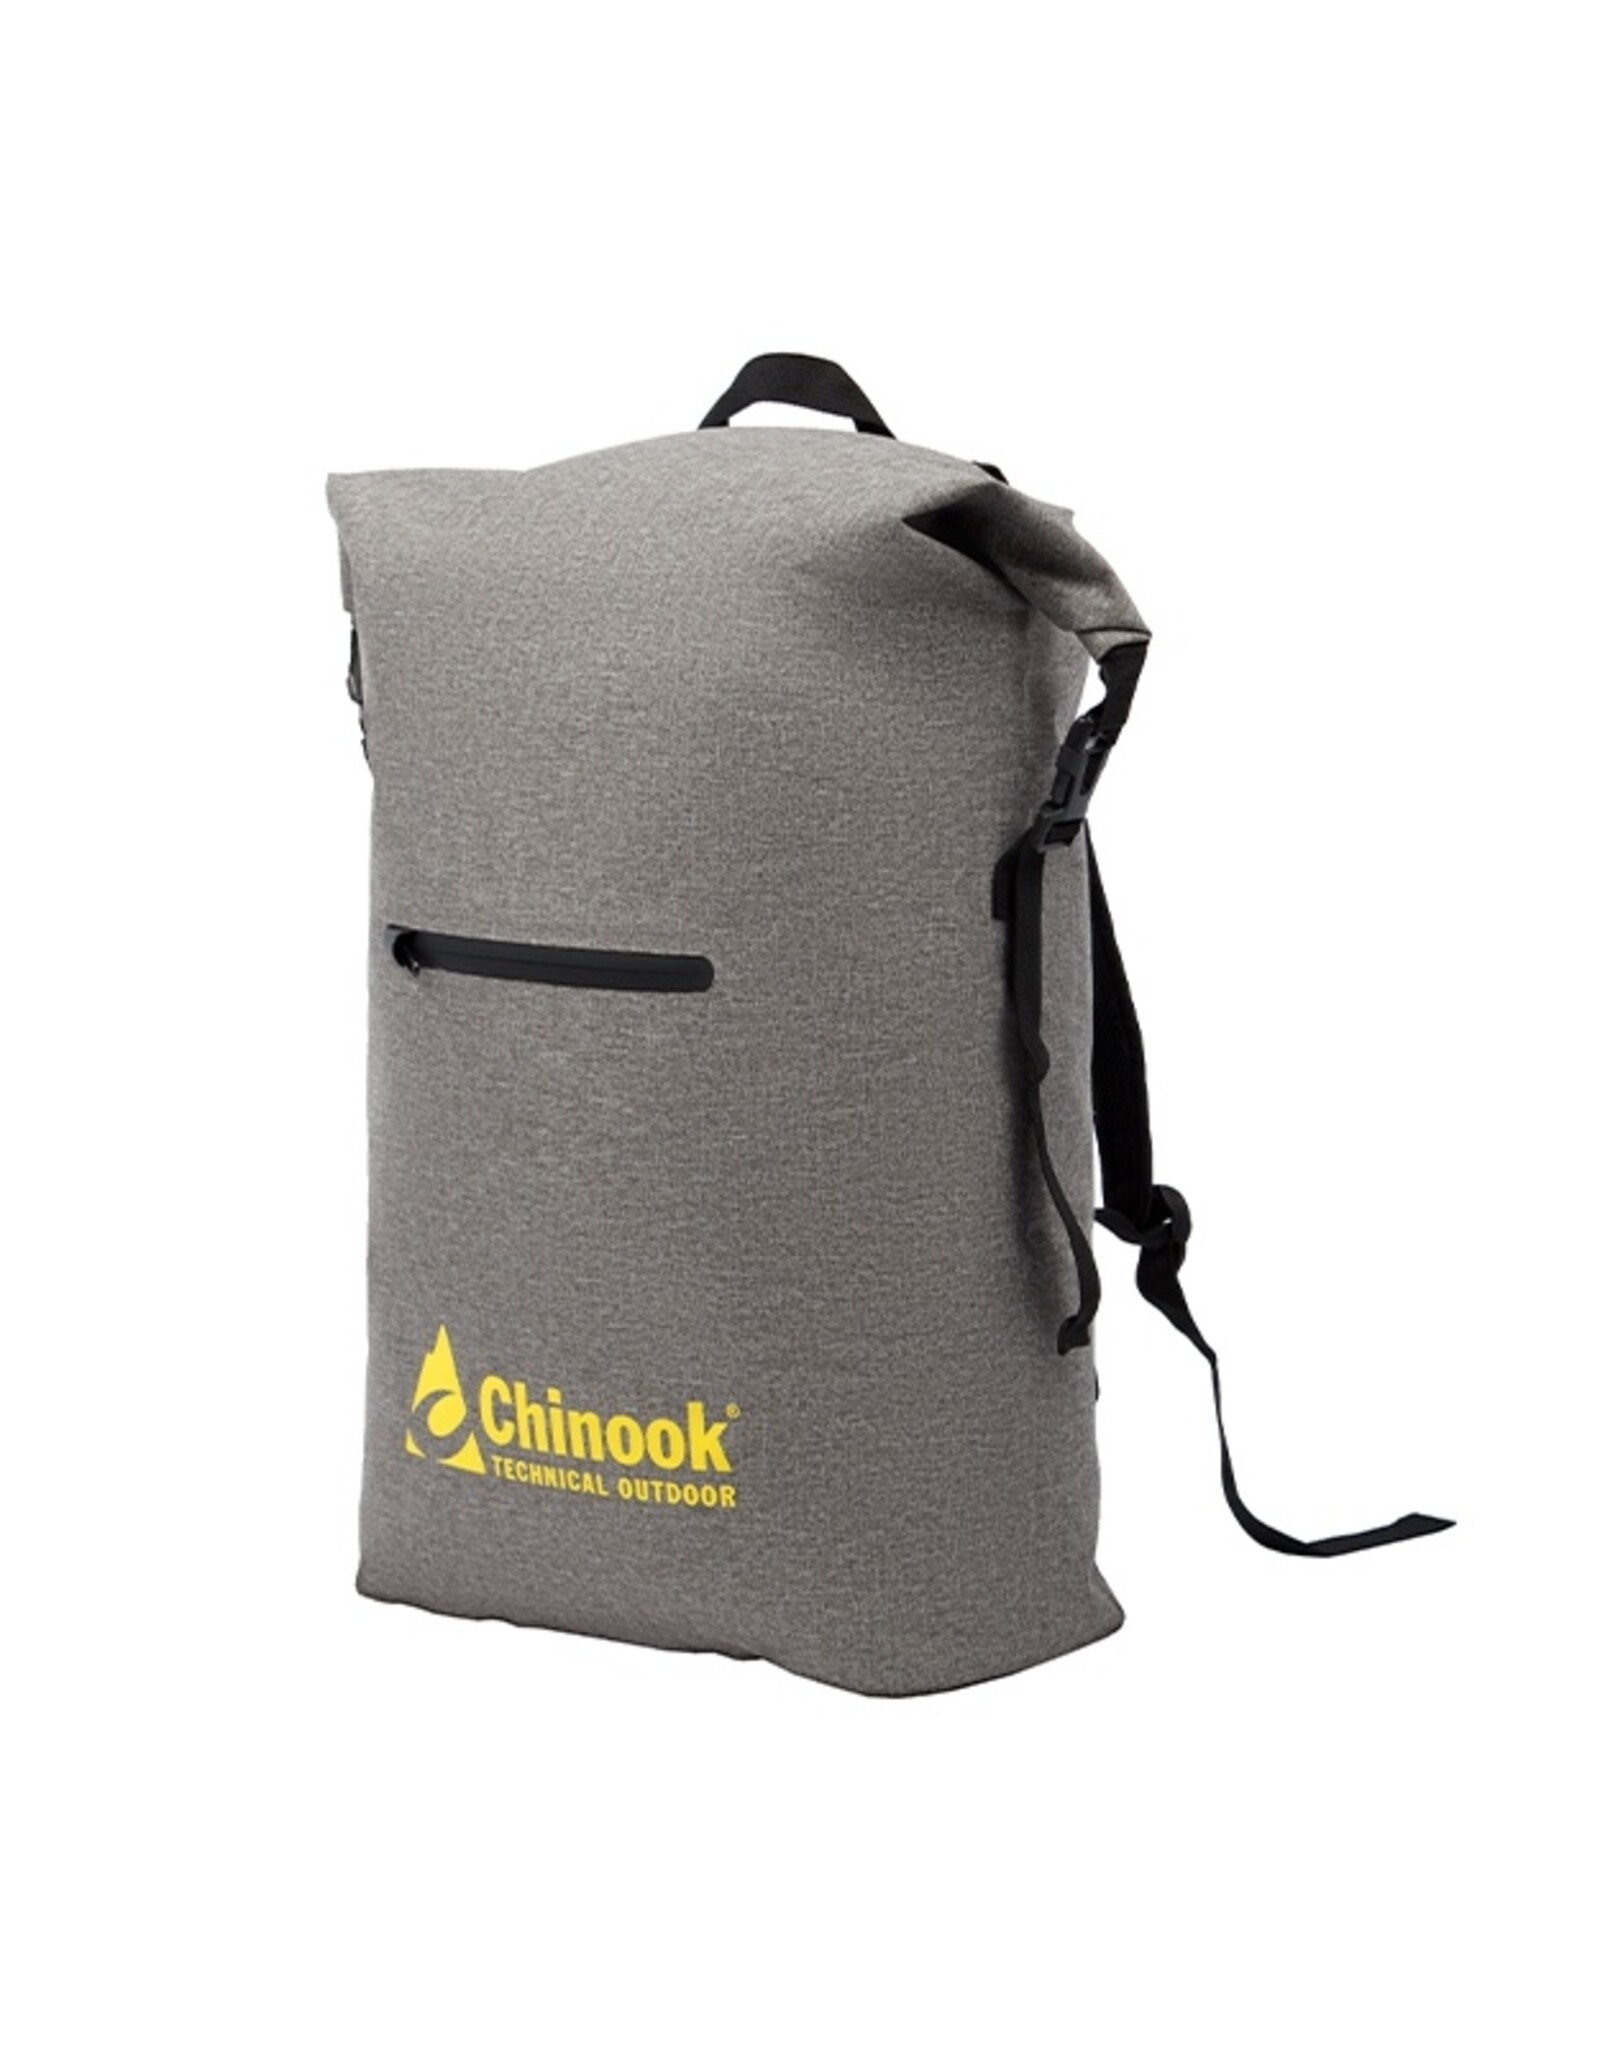 CHINOOK TECHNICAL OUTDOOR TEMAGAMI 40L DRY BACKPACK - GREY